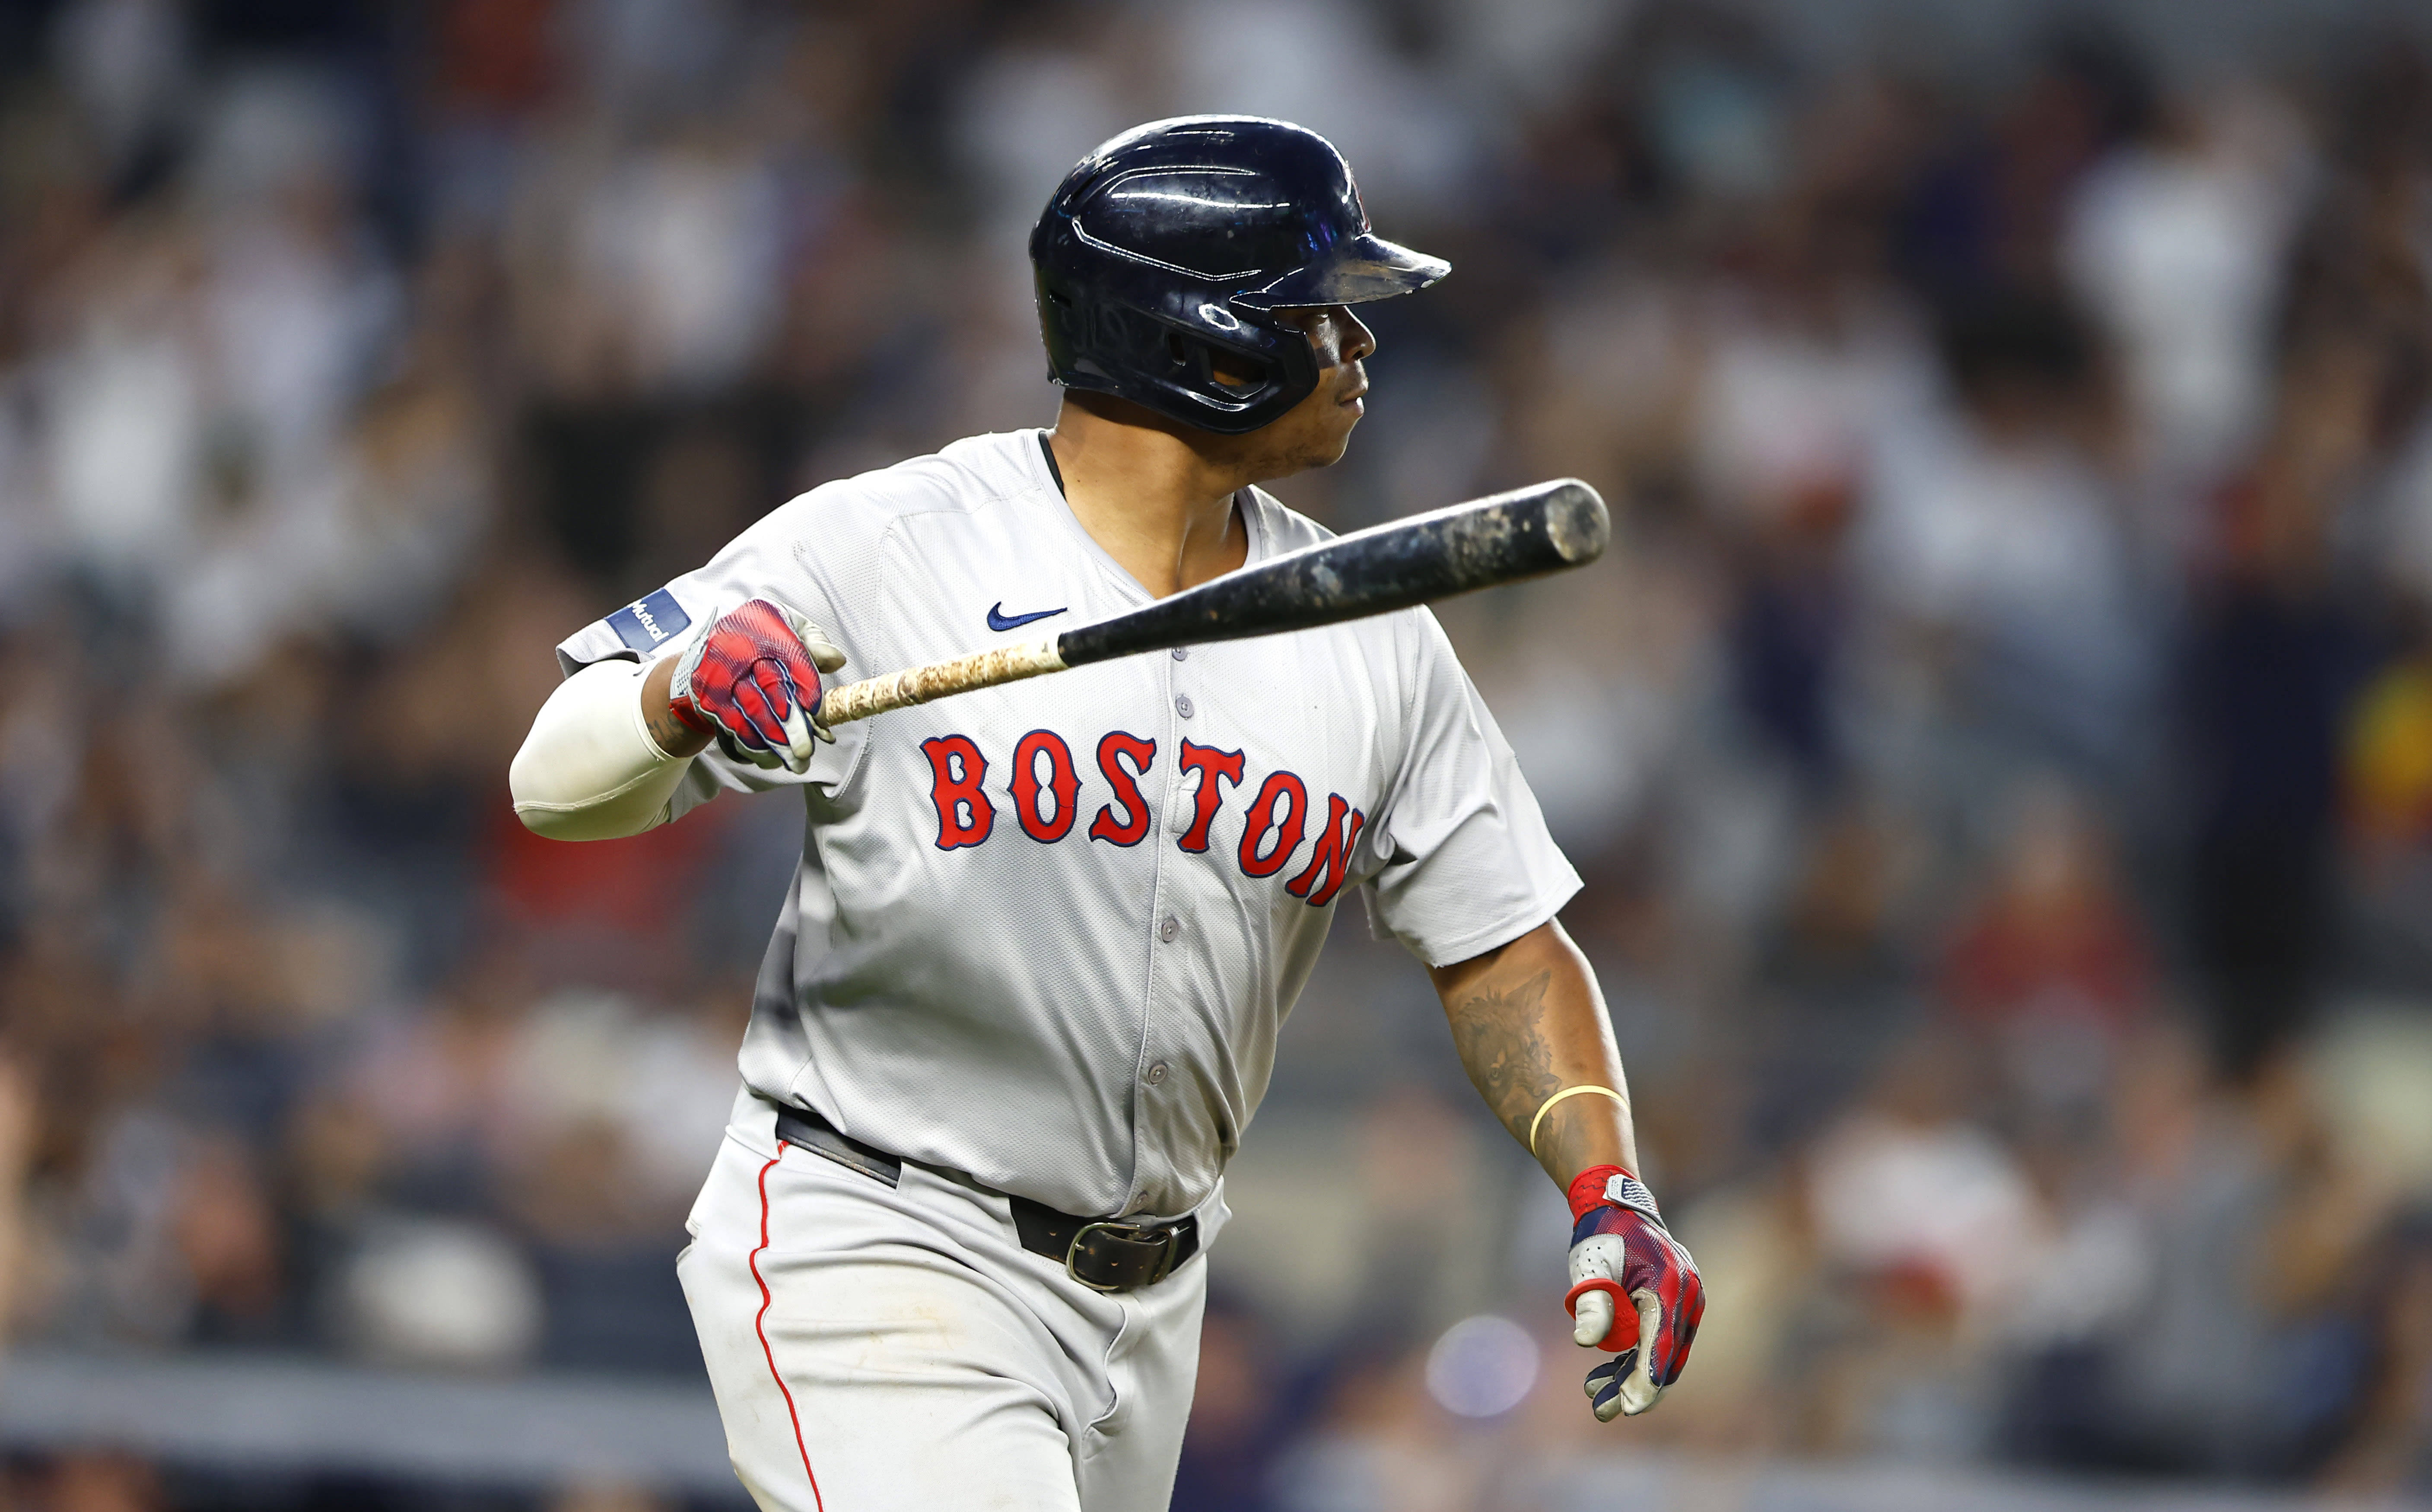 Devers hits 2 more homers vs. Yankees, Red Sox win 3-0 for New York's 15th loss in 20 games